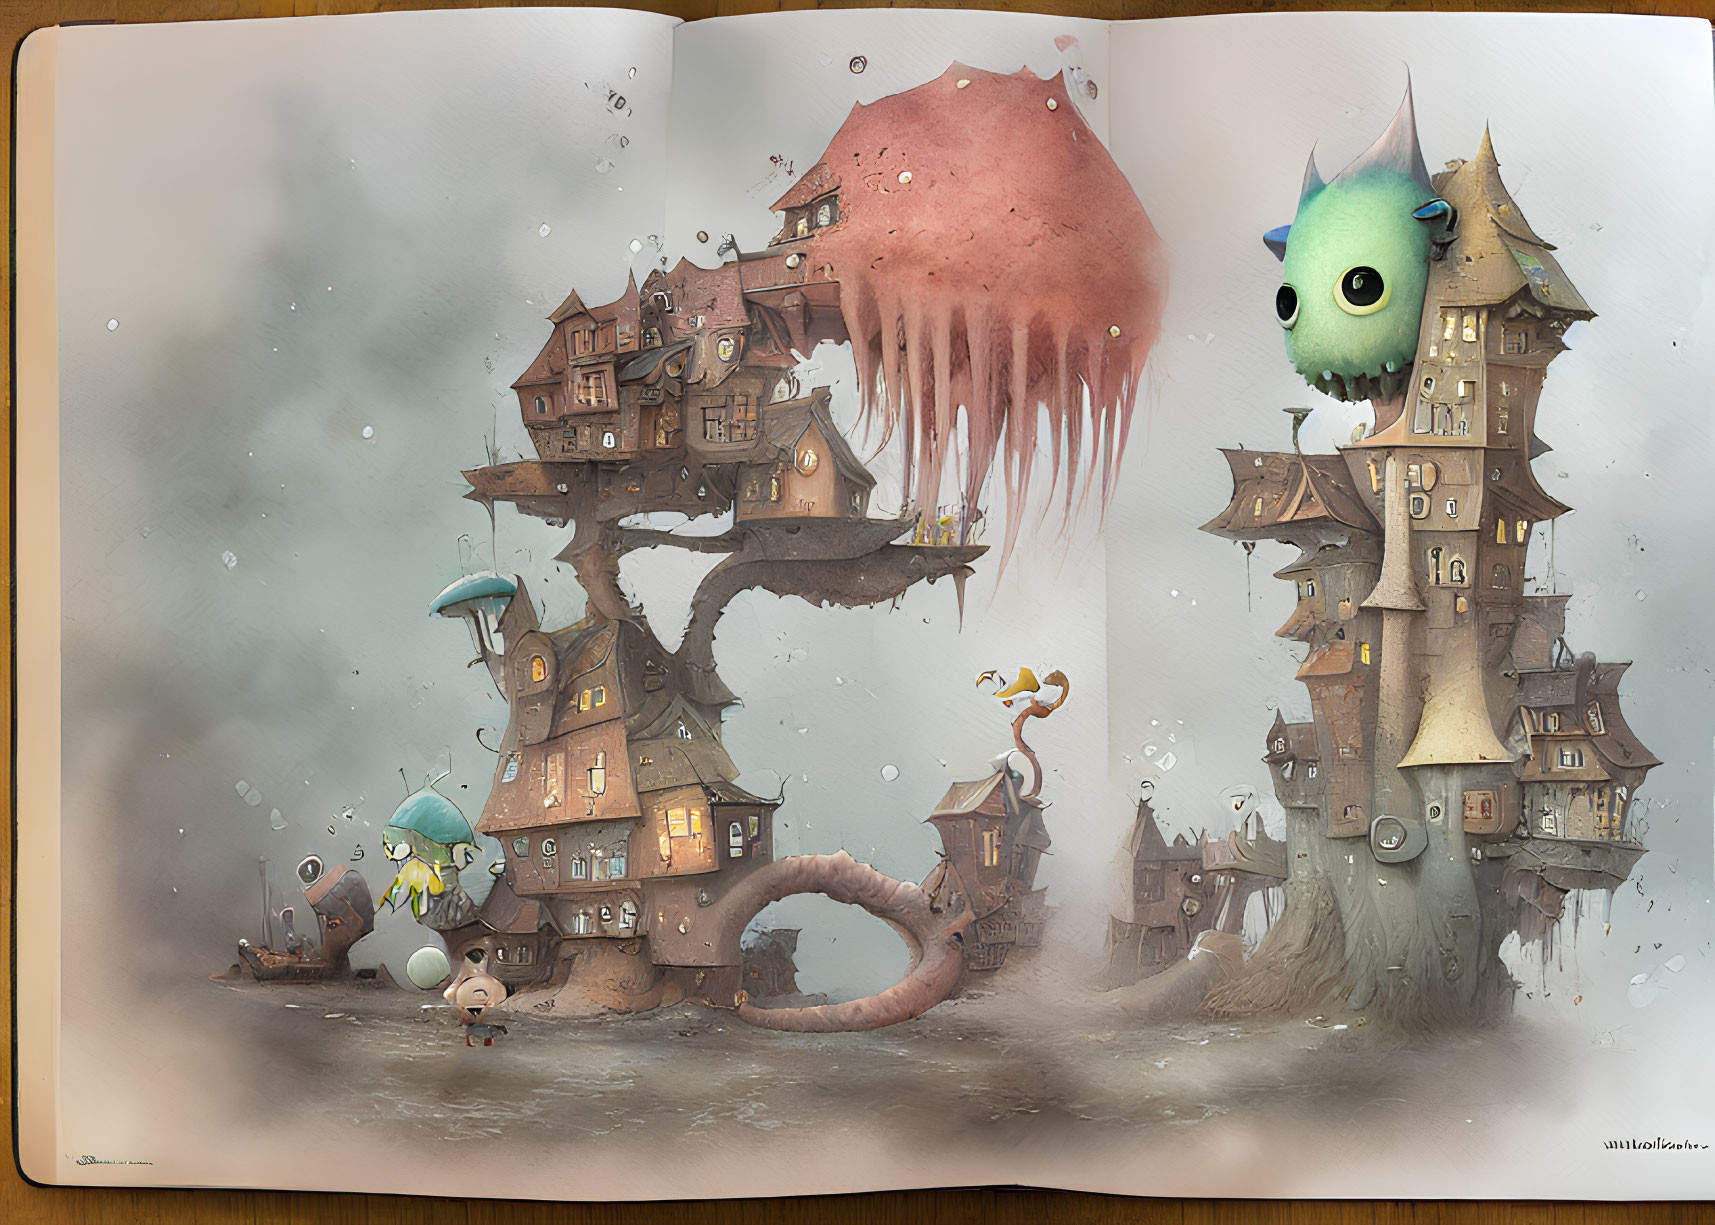 Whimsical Floating Houses and Green Creature in Illustrated Book